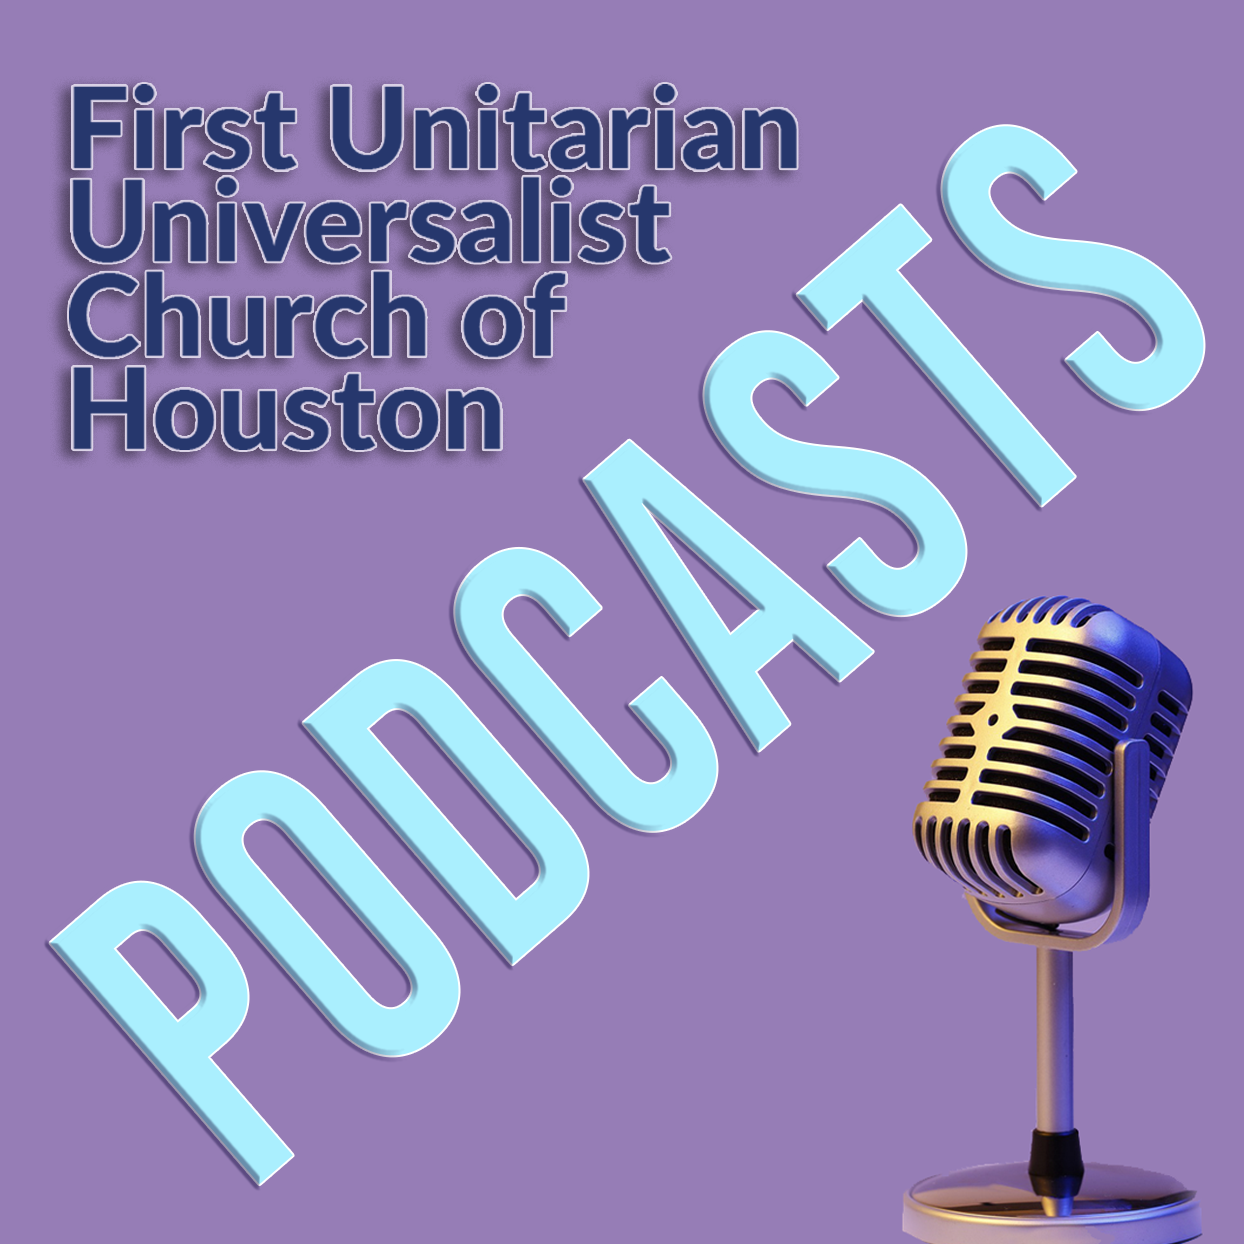 podcasts at First Unitarian Universalist Church of Houston